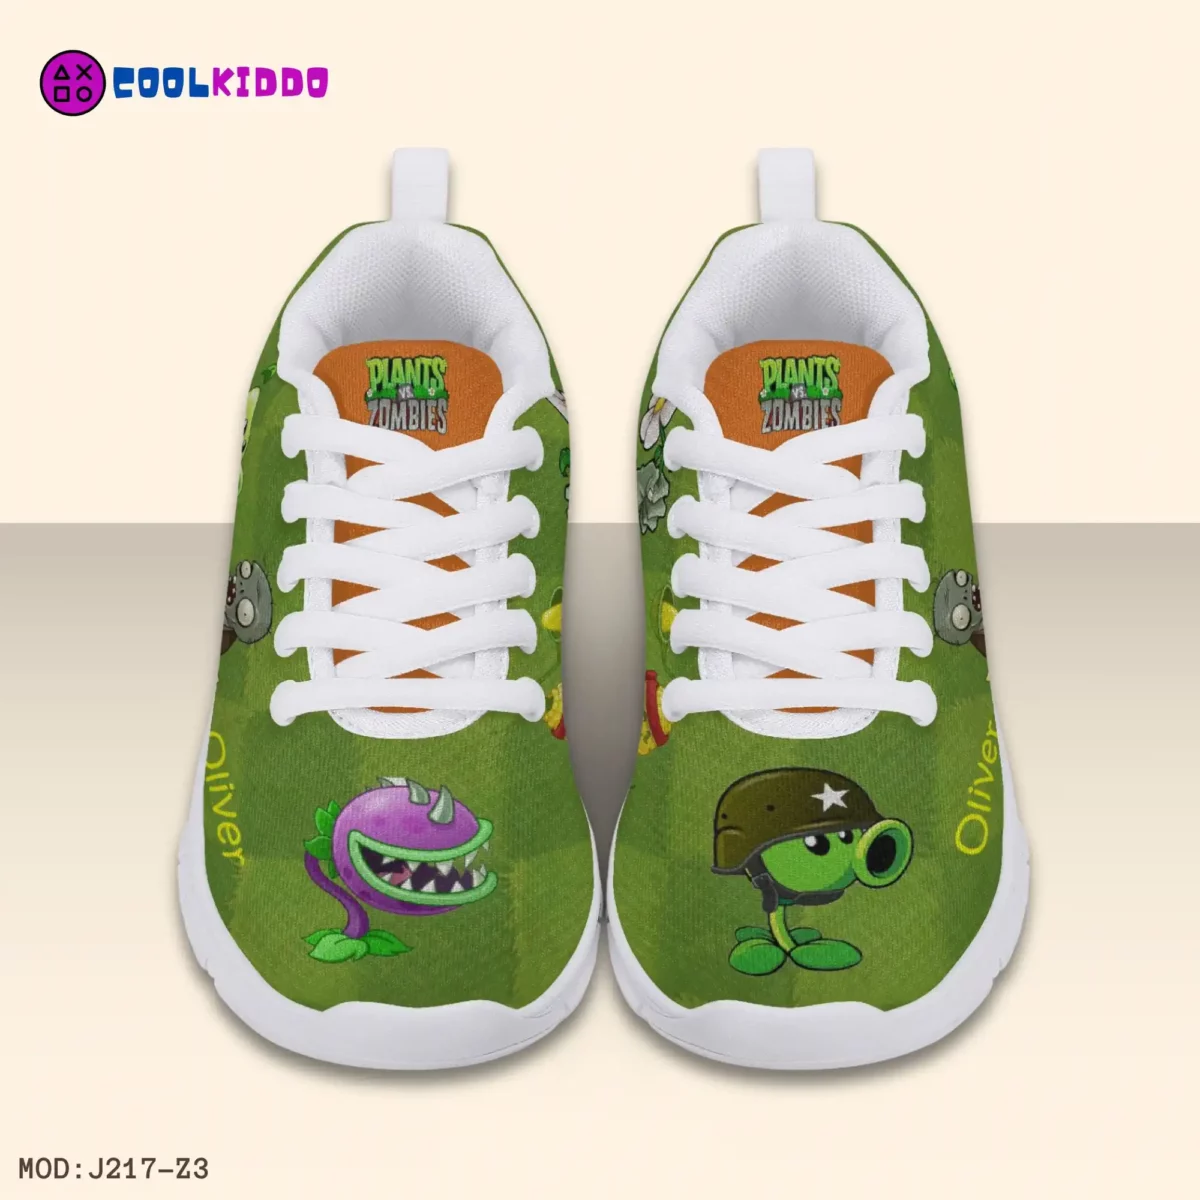 Personalized Plants vs Zombies Video Game Inspired Athletic Shoes for Kids/Youth Lightweight Mesh Sneakers Cool Kiddo 18